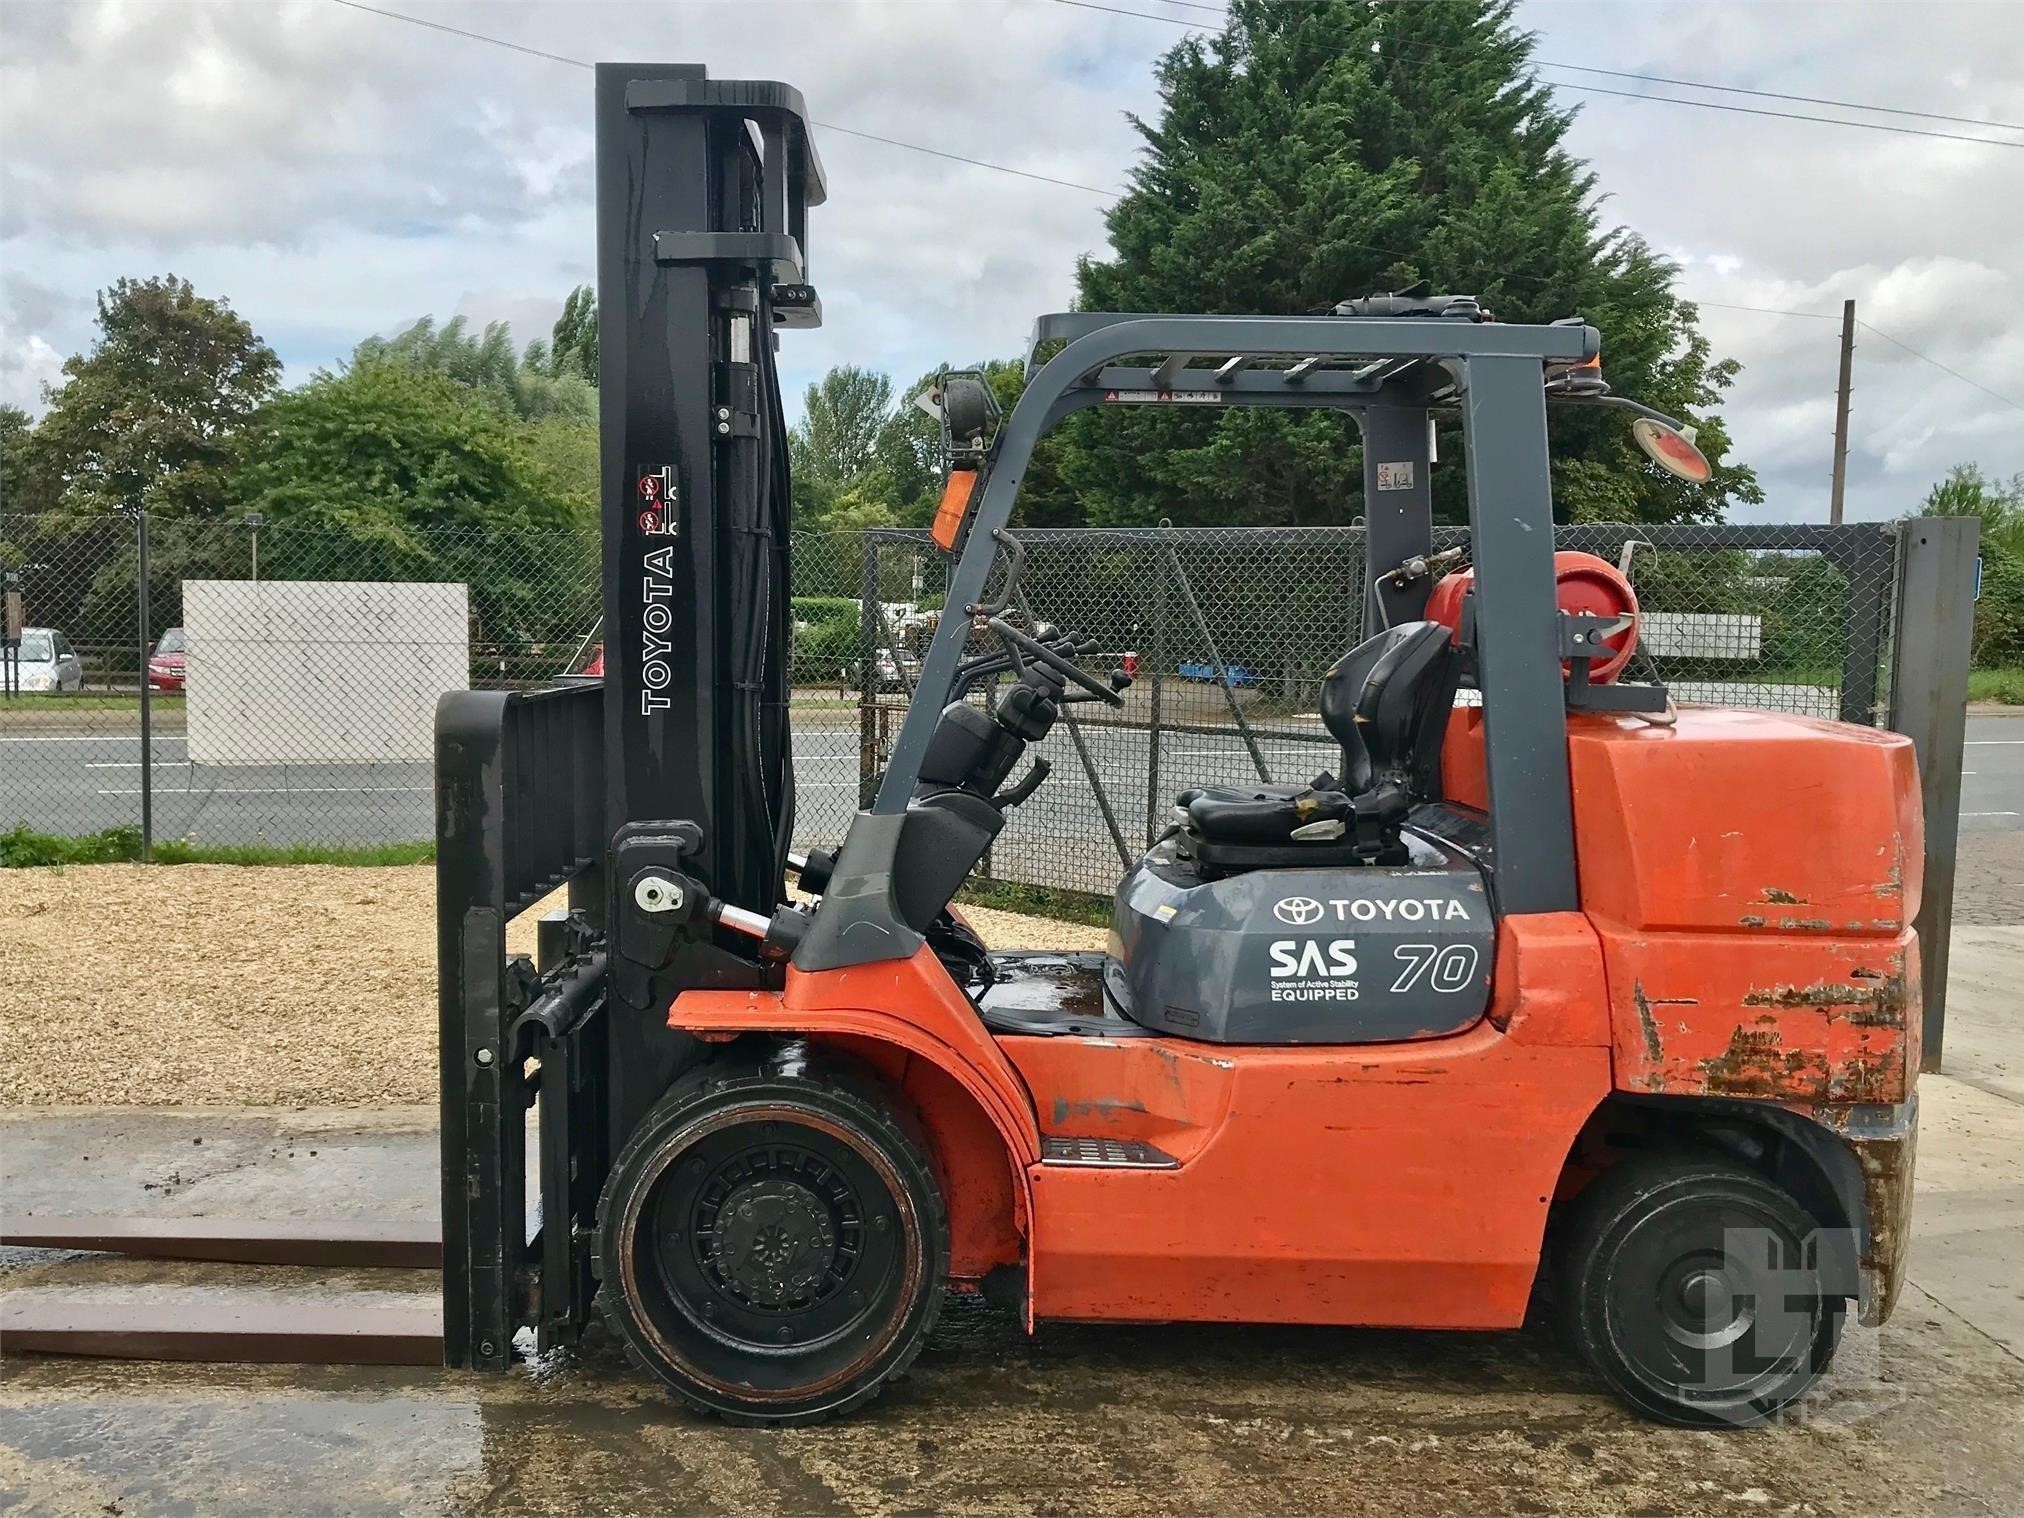 Forklifts For Sale 14831 Listings Liftstoday United Kingdom